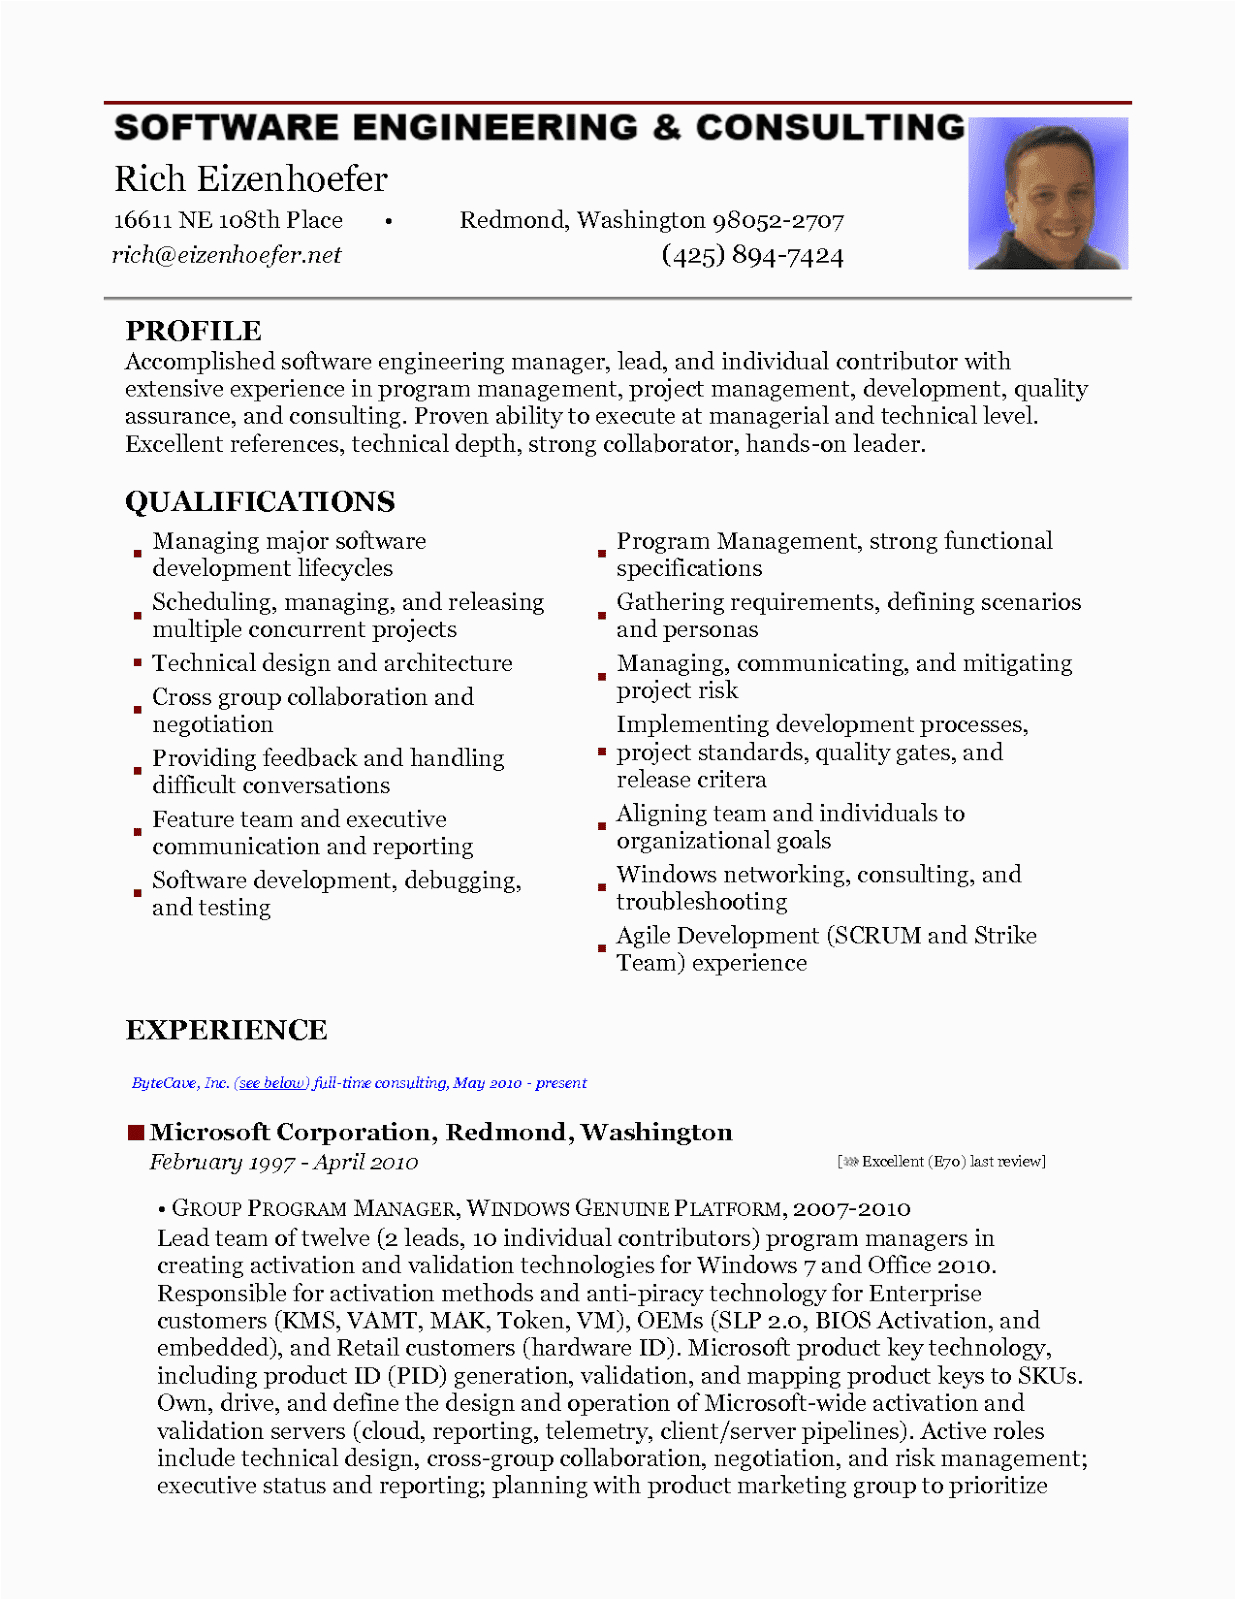 Sample Resume for 2 Years Experience 2 Years Experience Resume Scribd India